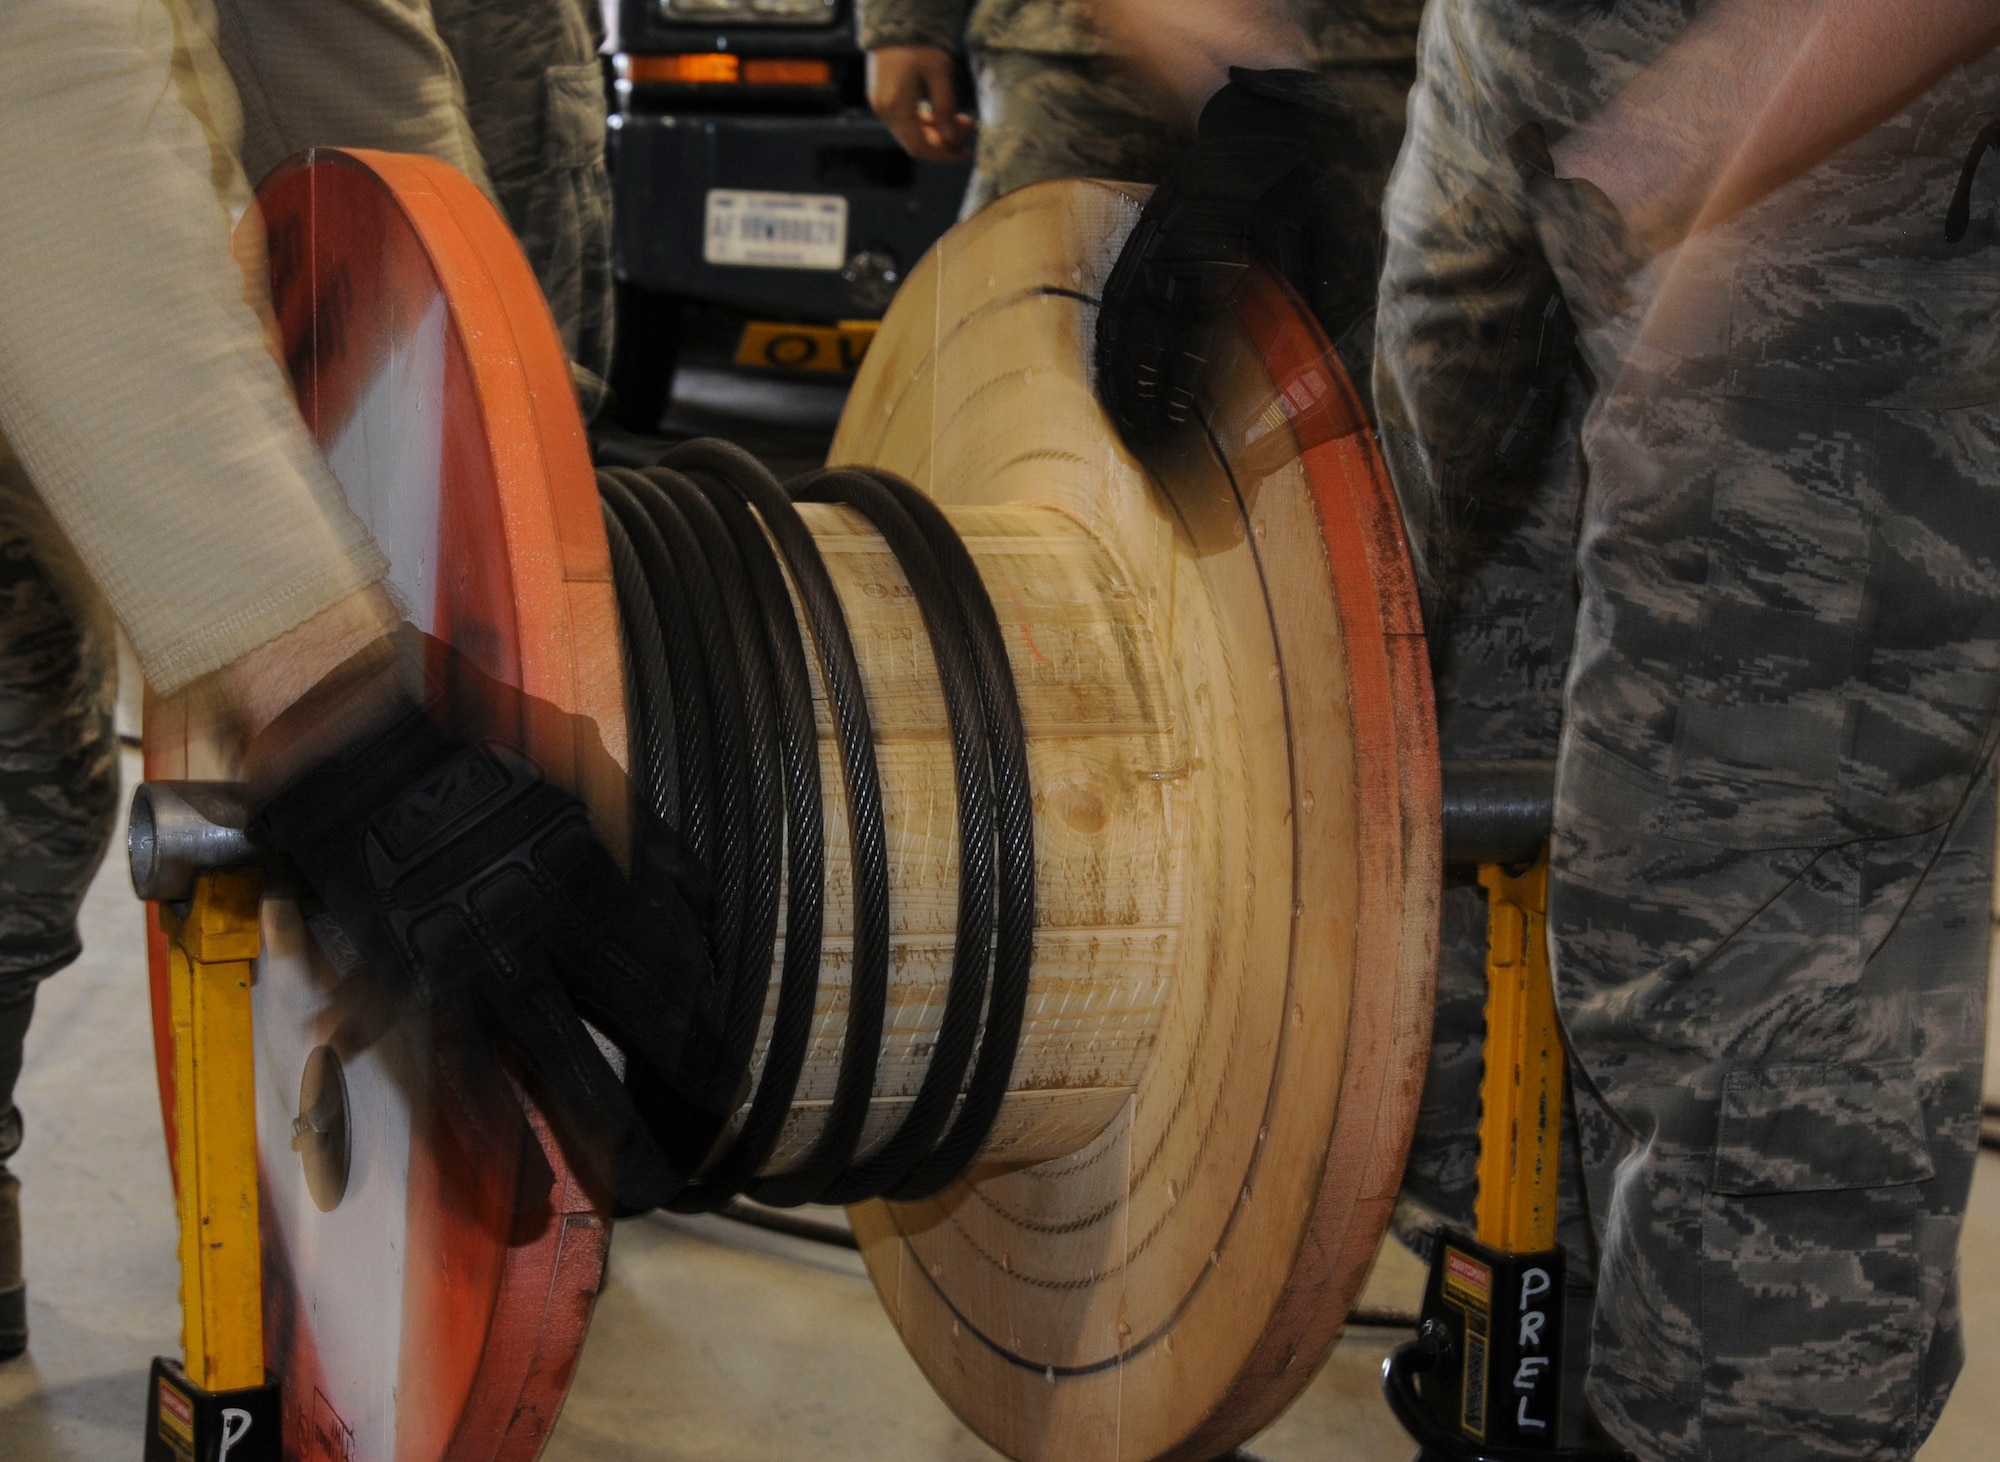 Members of the 91st Missile Operations Squadron mechanical and pneudraulics section work together to wind a cable from a crane onto a spool on Minot Air Force Base, N.D. Oct. 30, 2014. The team utilized constant communication during the process to ensure they were utilizing a two-person concept and nothing was overlooked. (U.S. Air Force photo/Senior Airman Stephanie Morris)